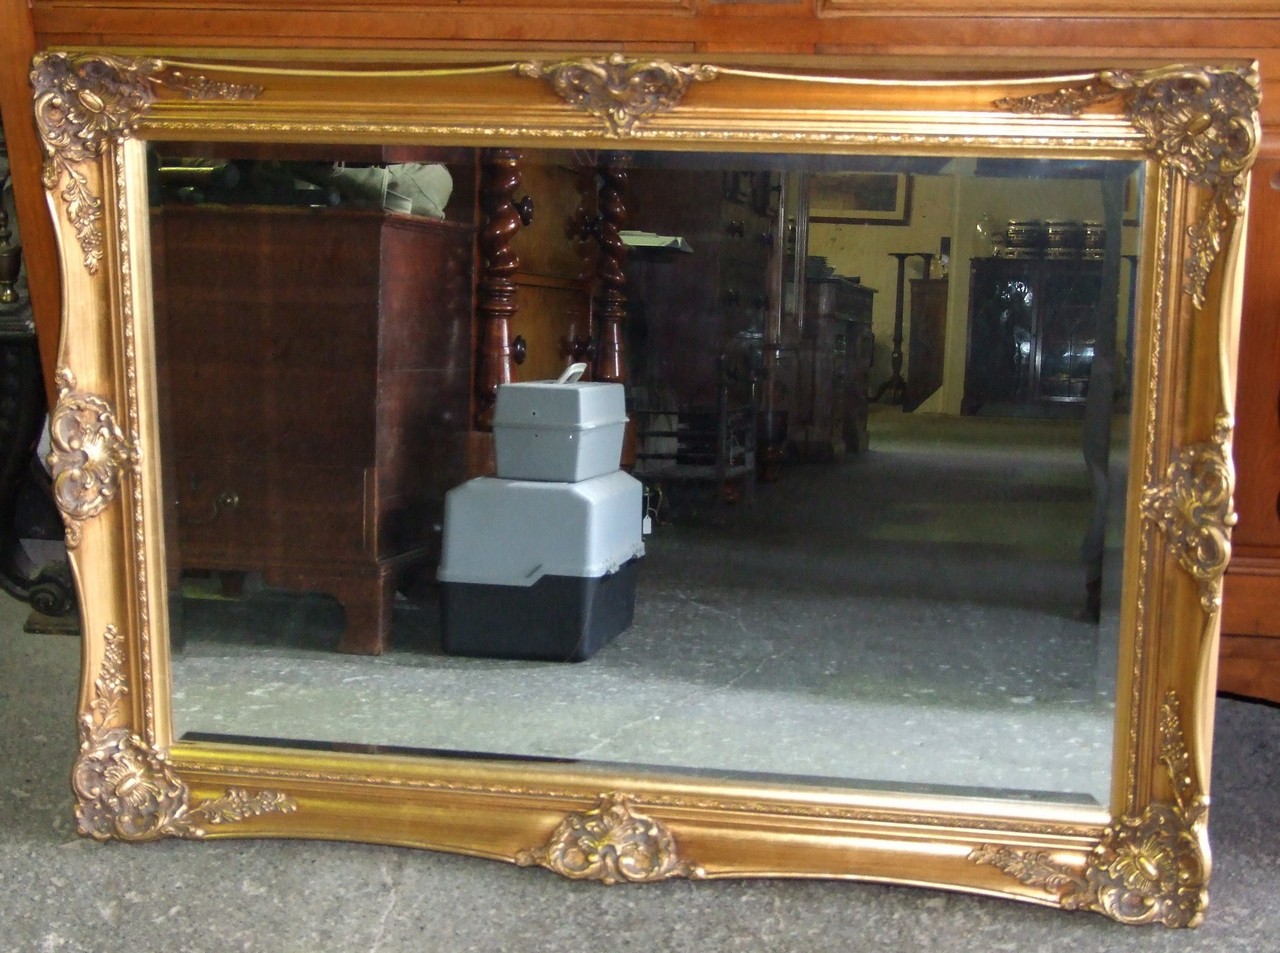 Giltswept Framed Mirror with Bevelled Glass. £60/80